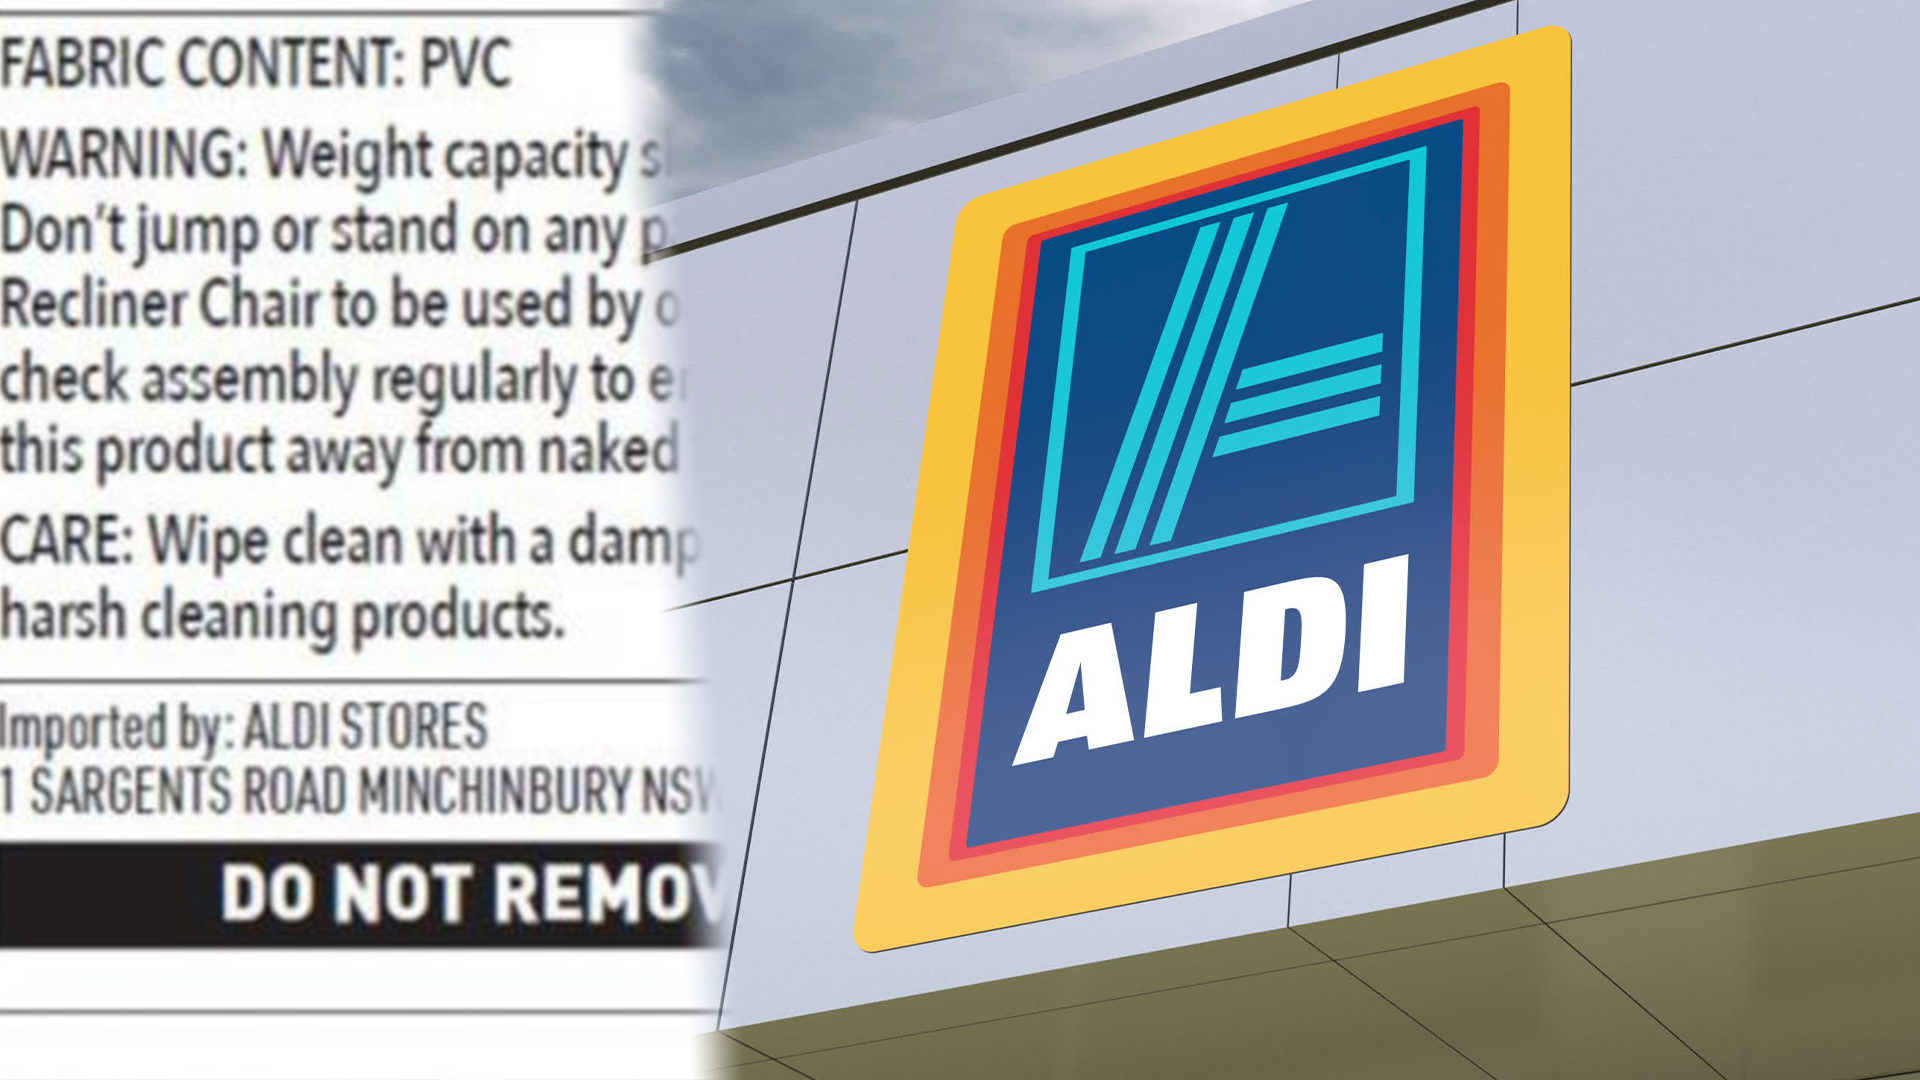 A Popular Aldi Product Has Been Recalled Over Fears It Could Cause